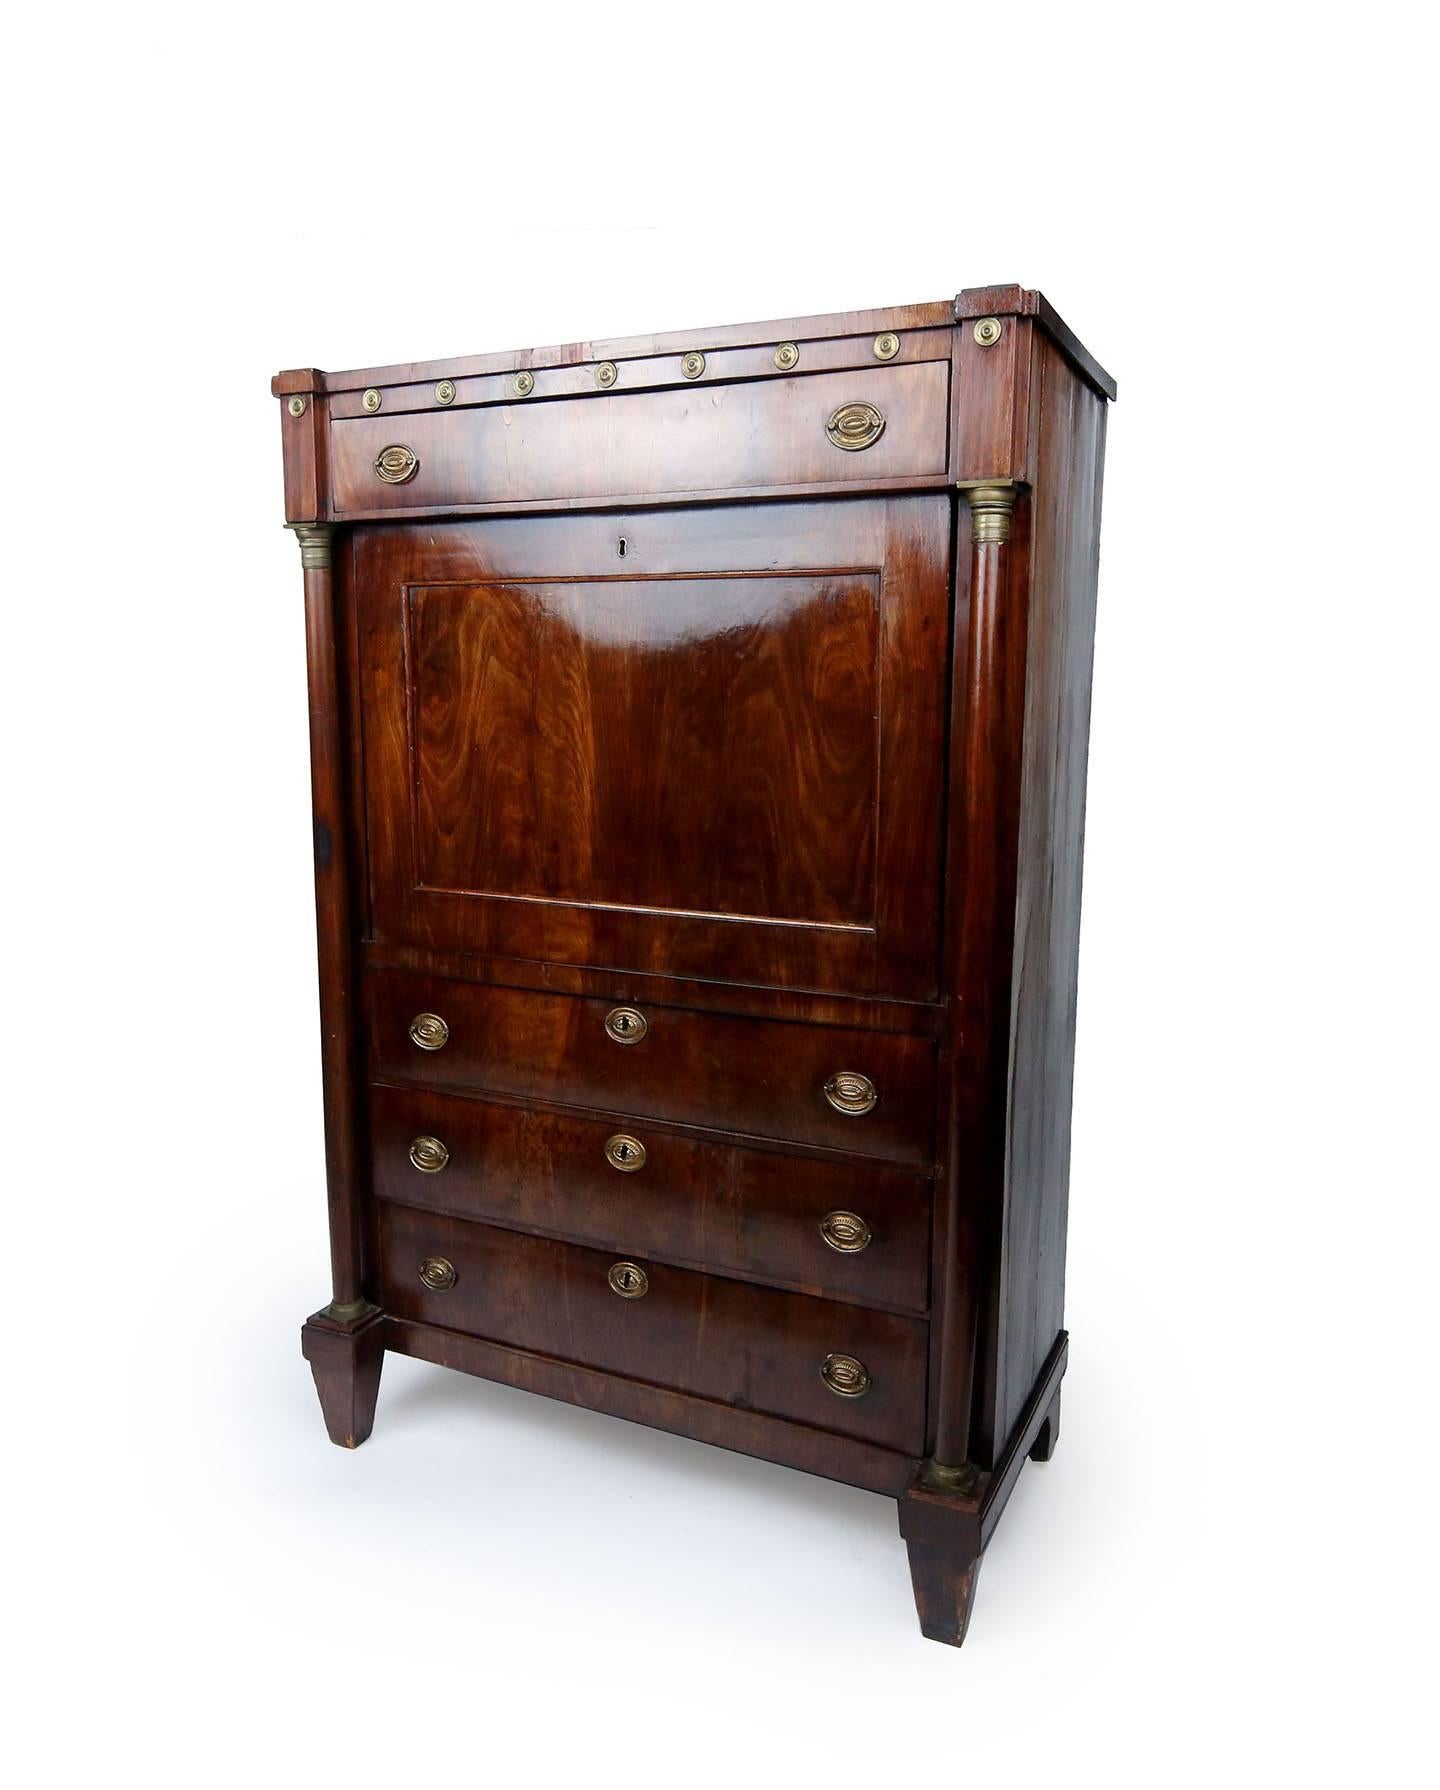 Architectural mahogany and oak fall-front secretary. The entablature drawer studded at the top by ornamental pressed brass with star design is supported by slim full round columns which rest on diminishing square bases. These columns have finely